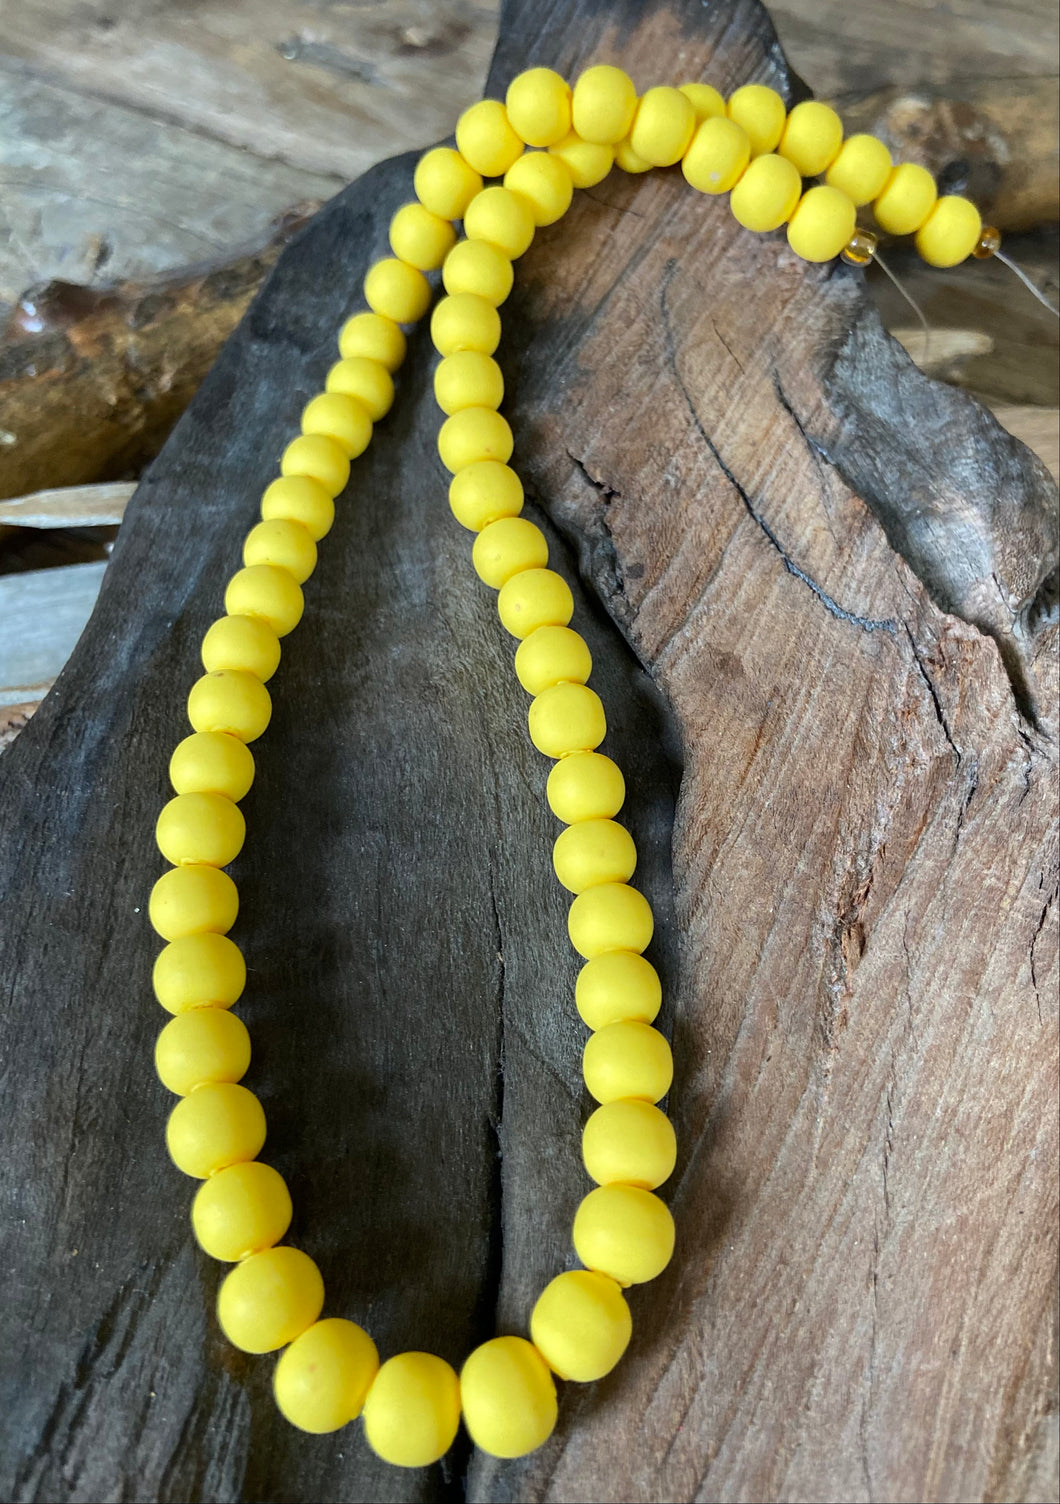 8mm Yellow Rubber coated Glass beads